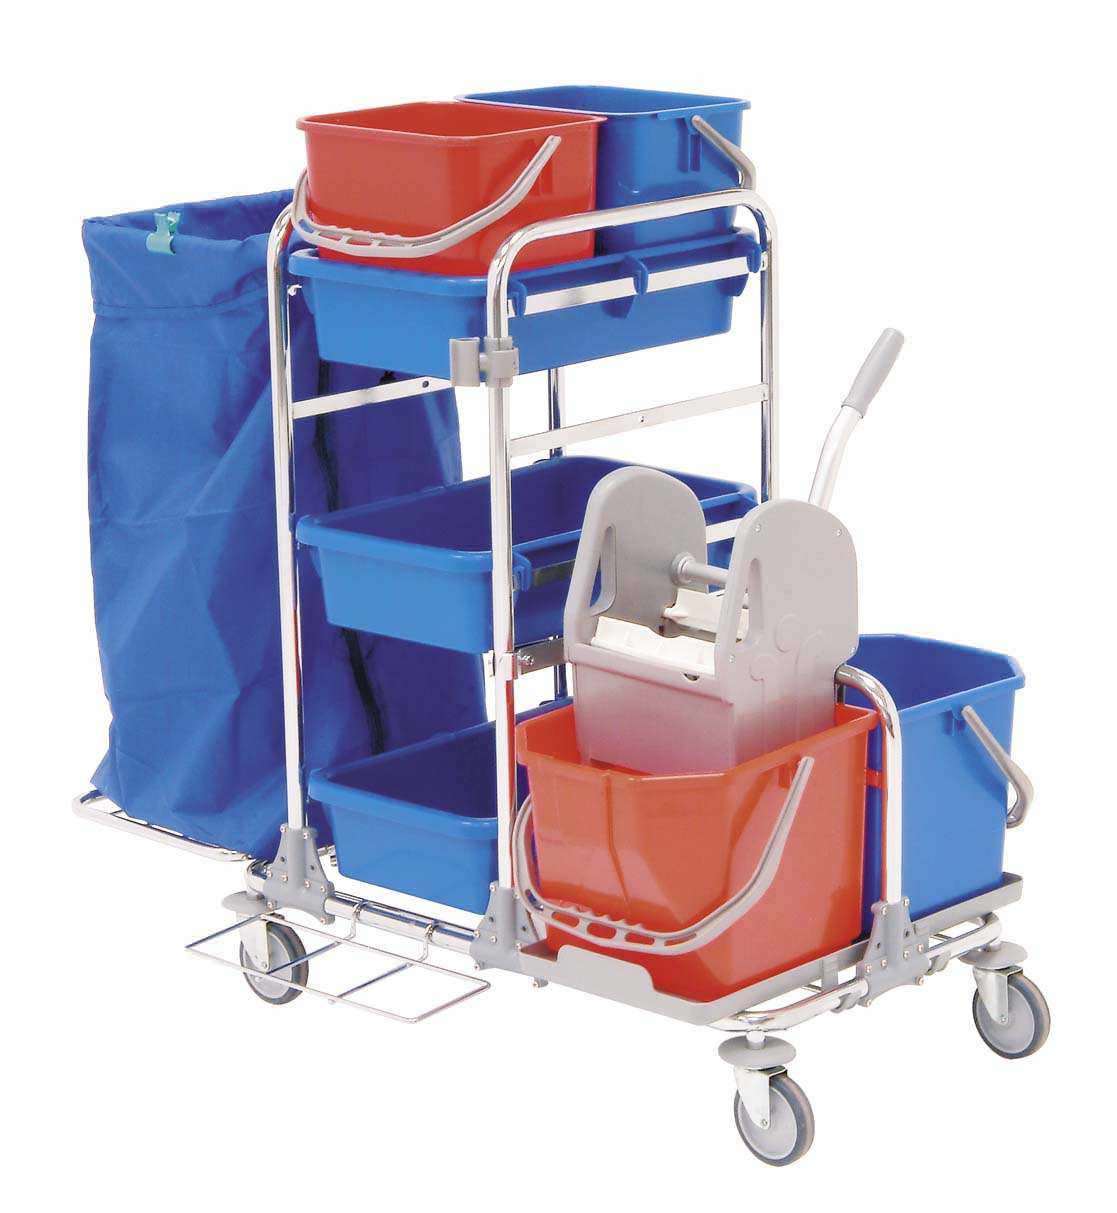 Stainless steel nursing trolley for dirty linen and waste